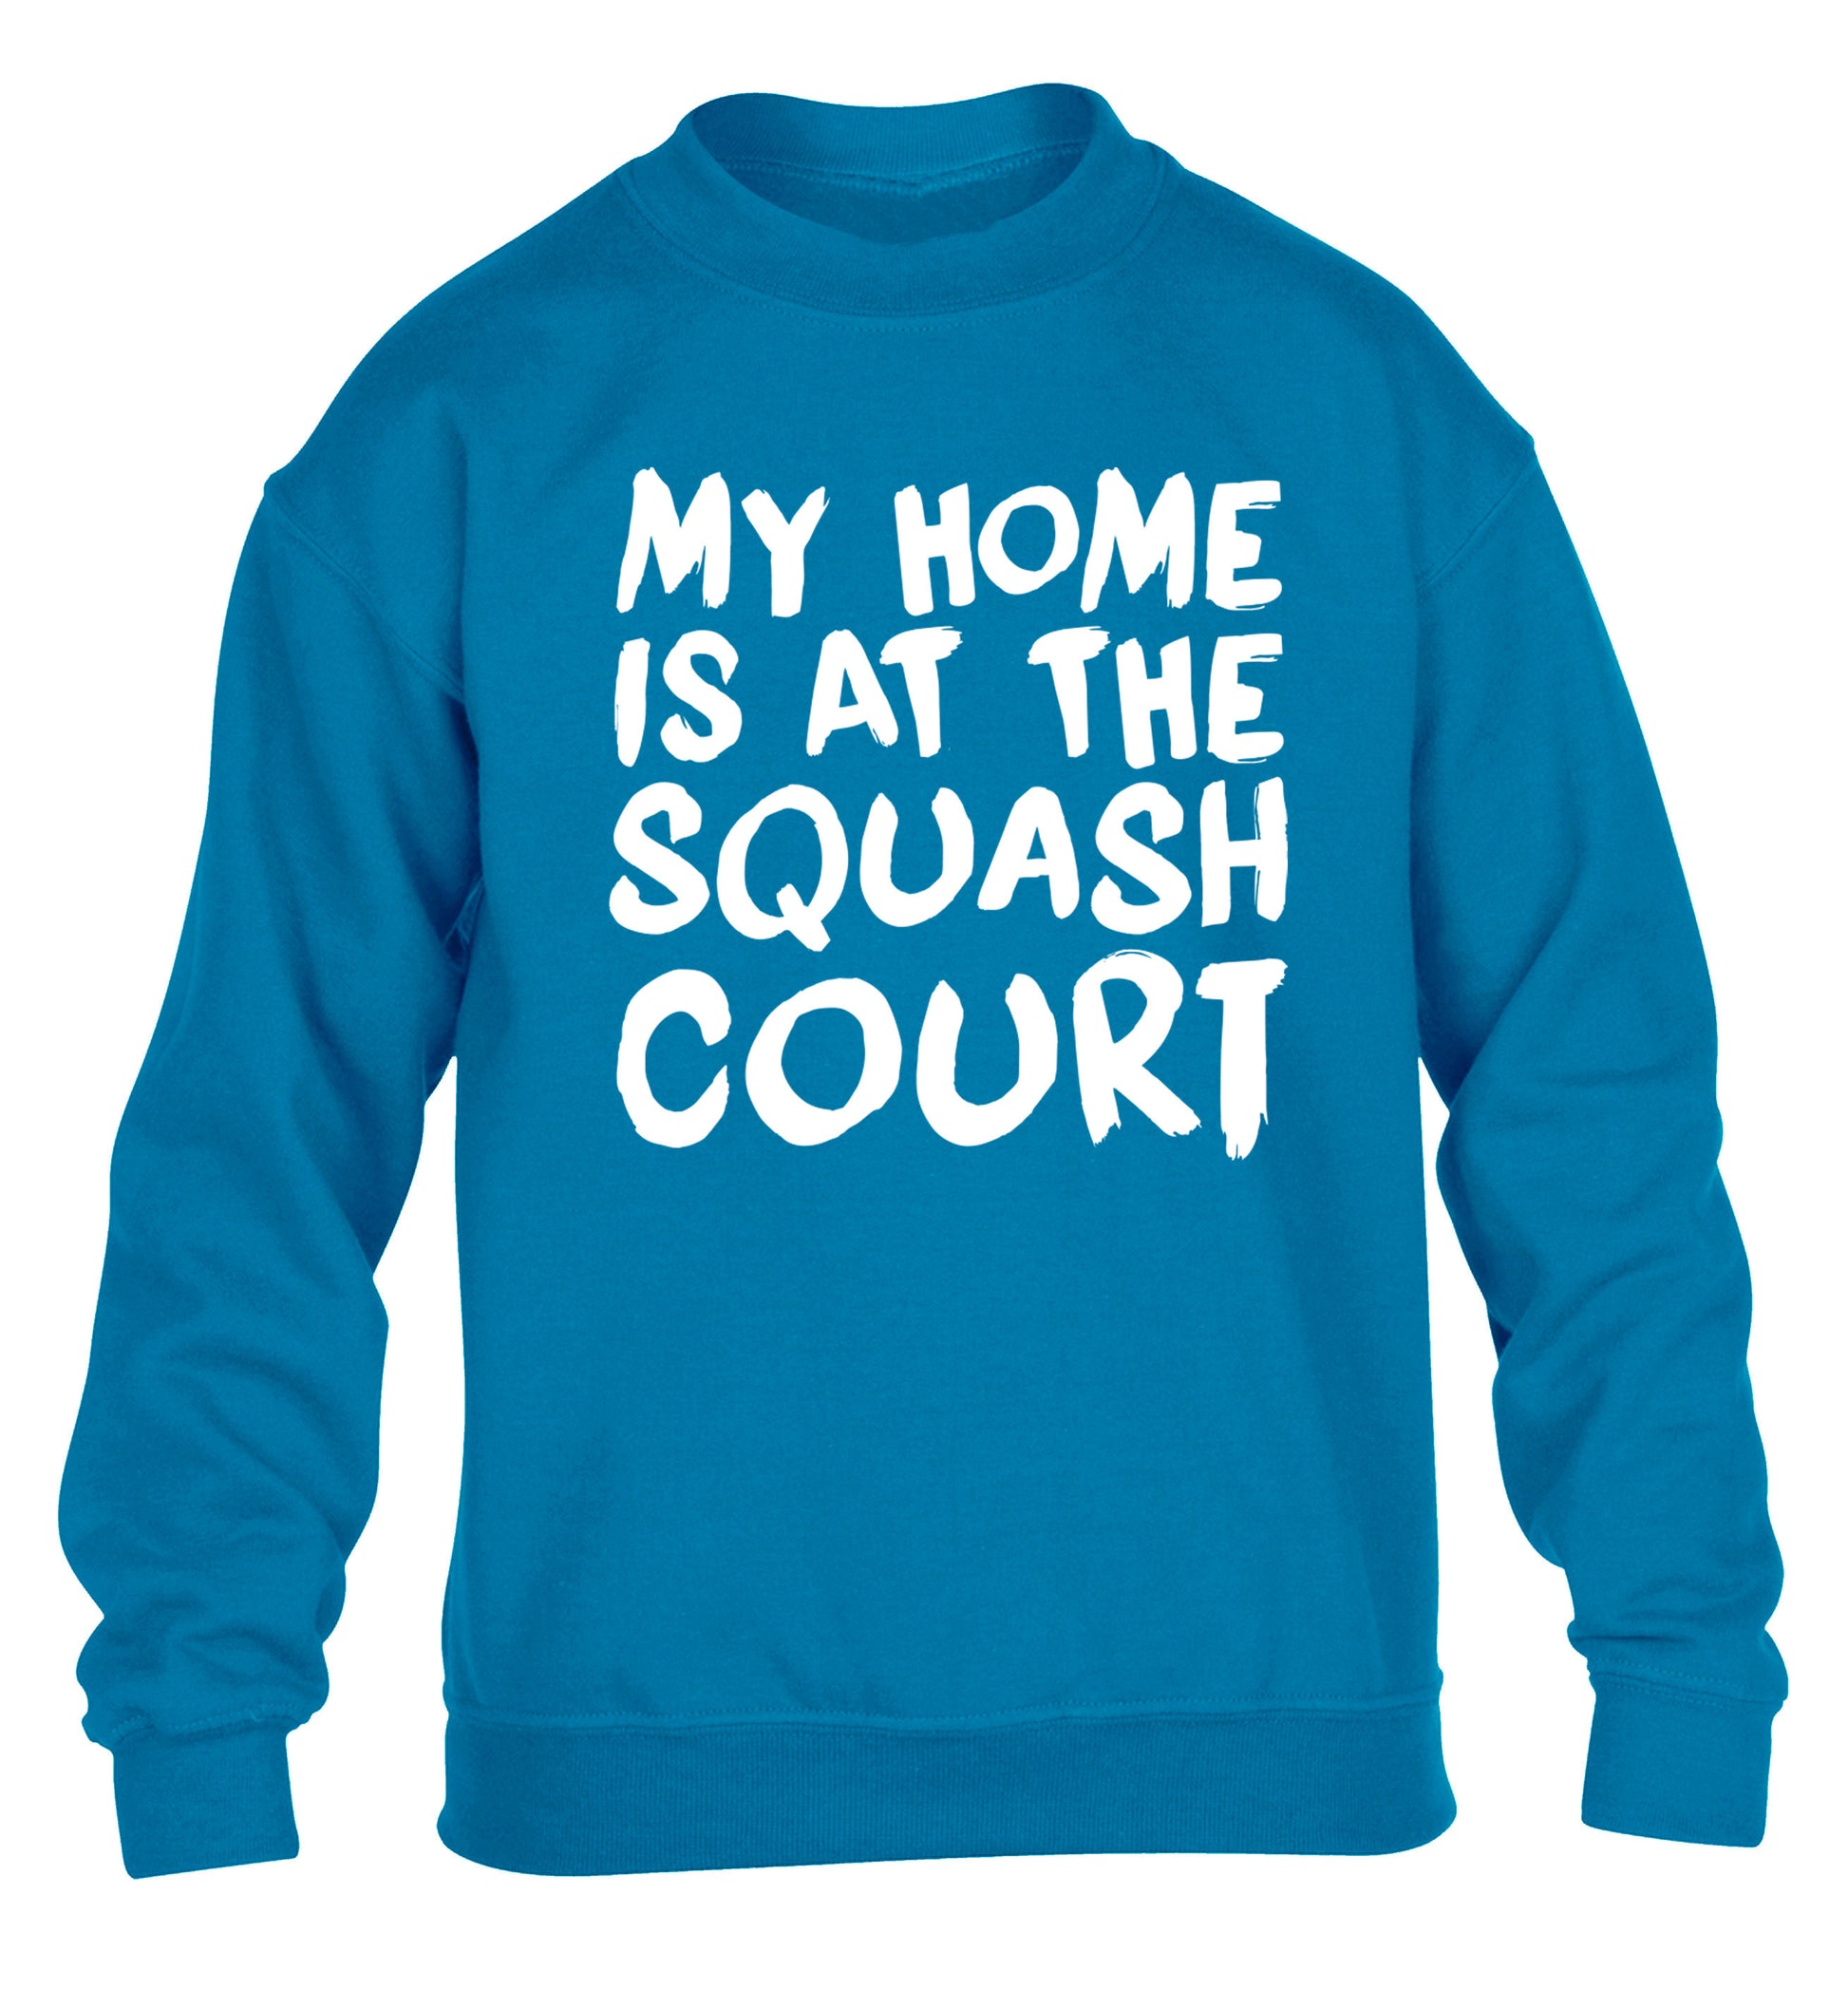 My home is at the squash court children's blue sweater 12-14 Years